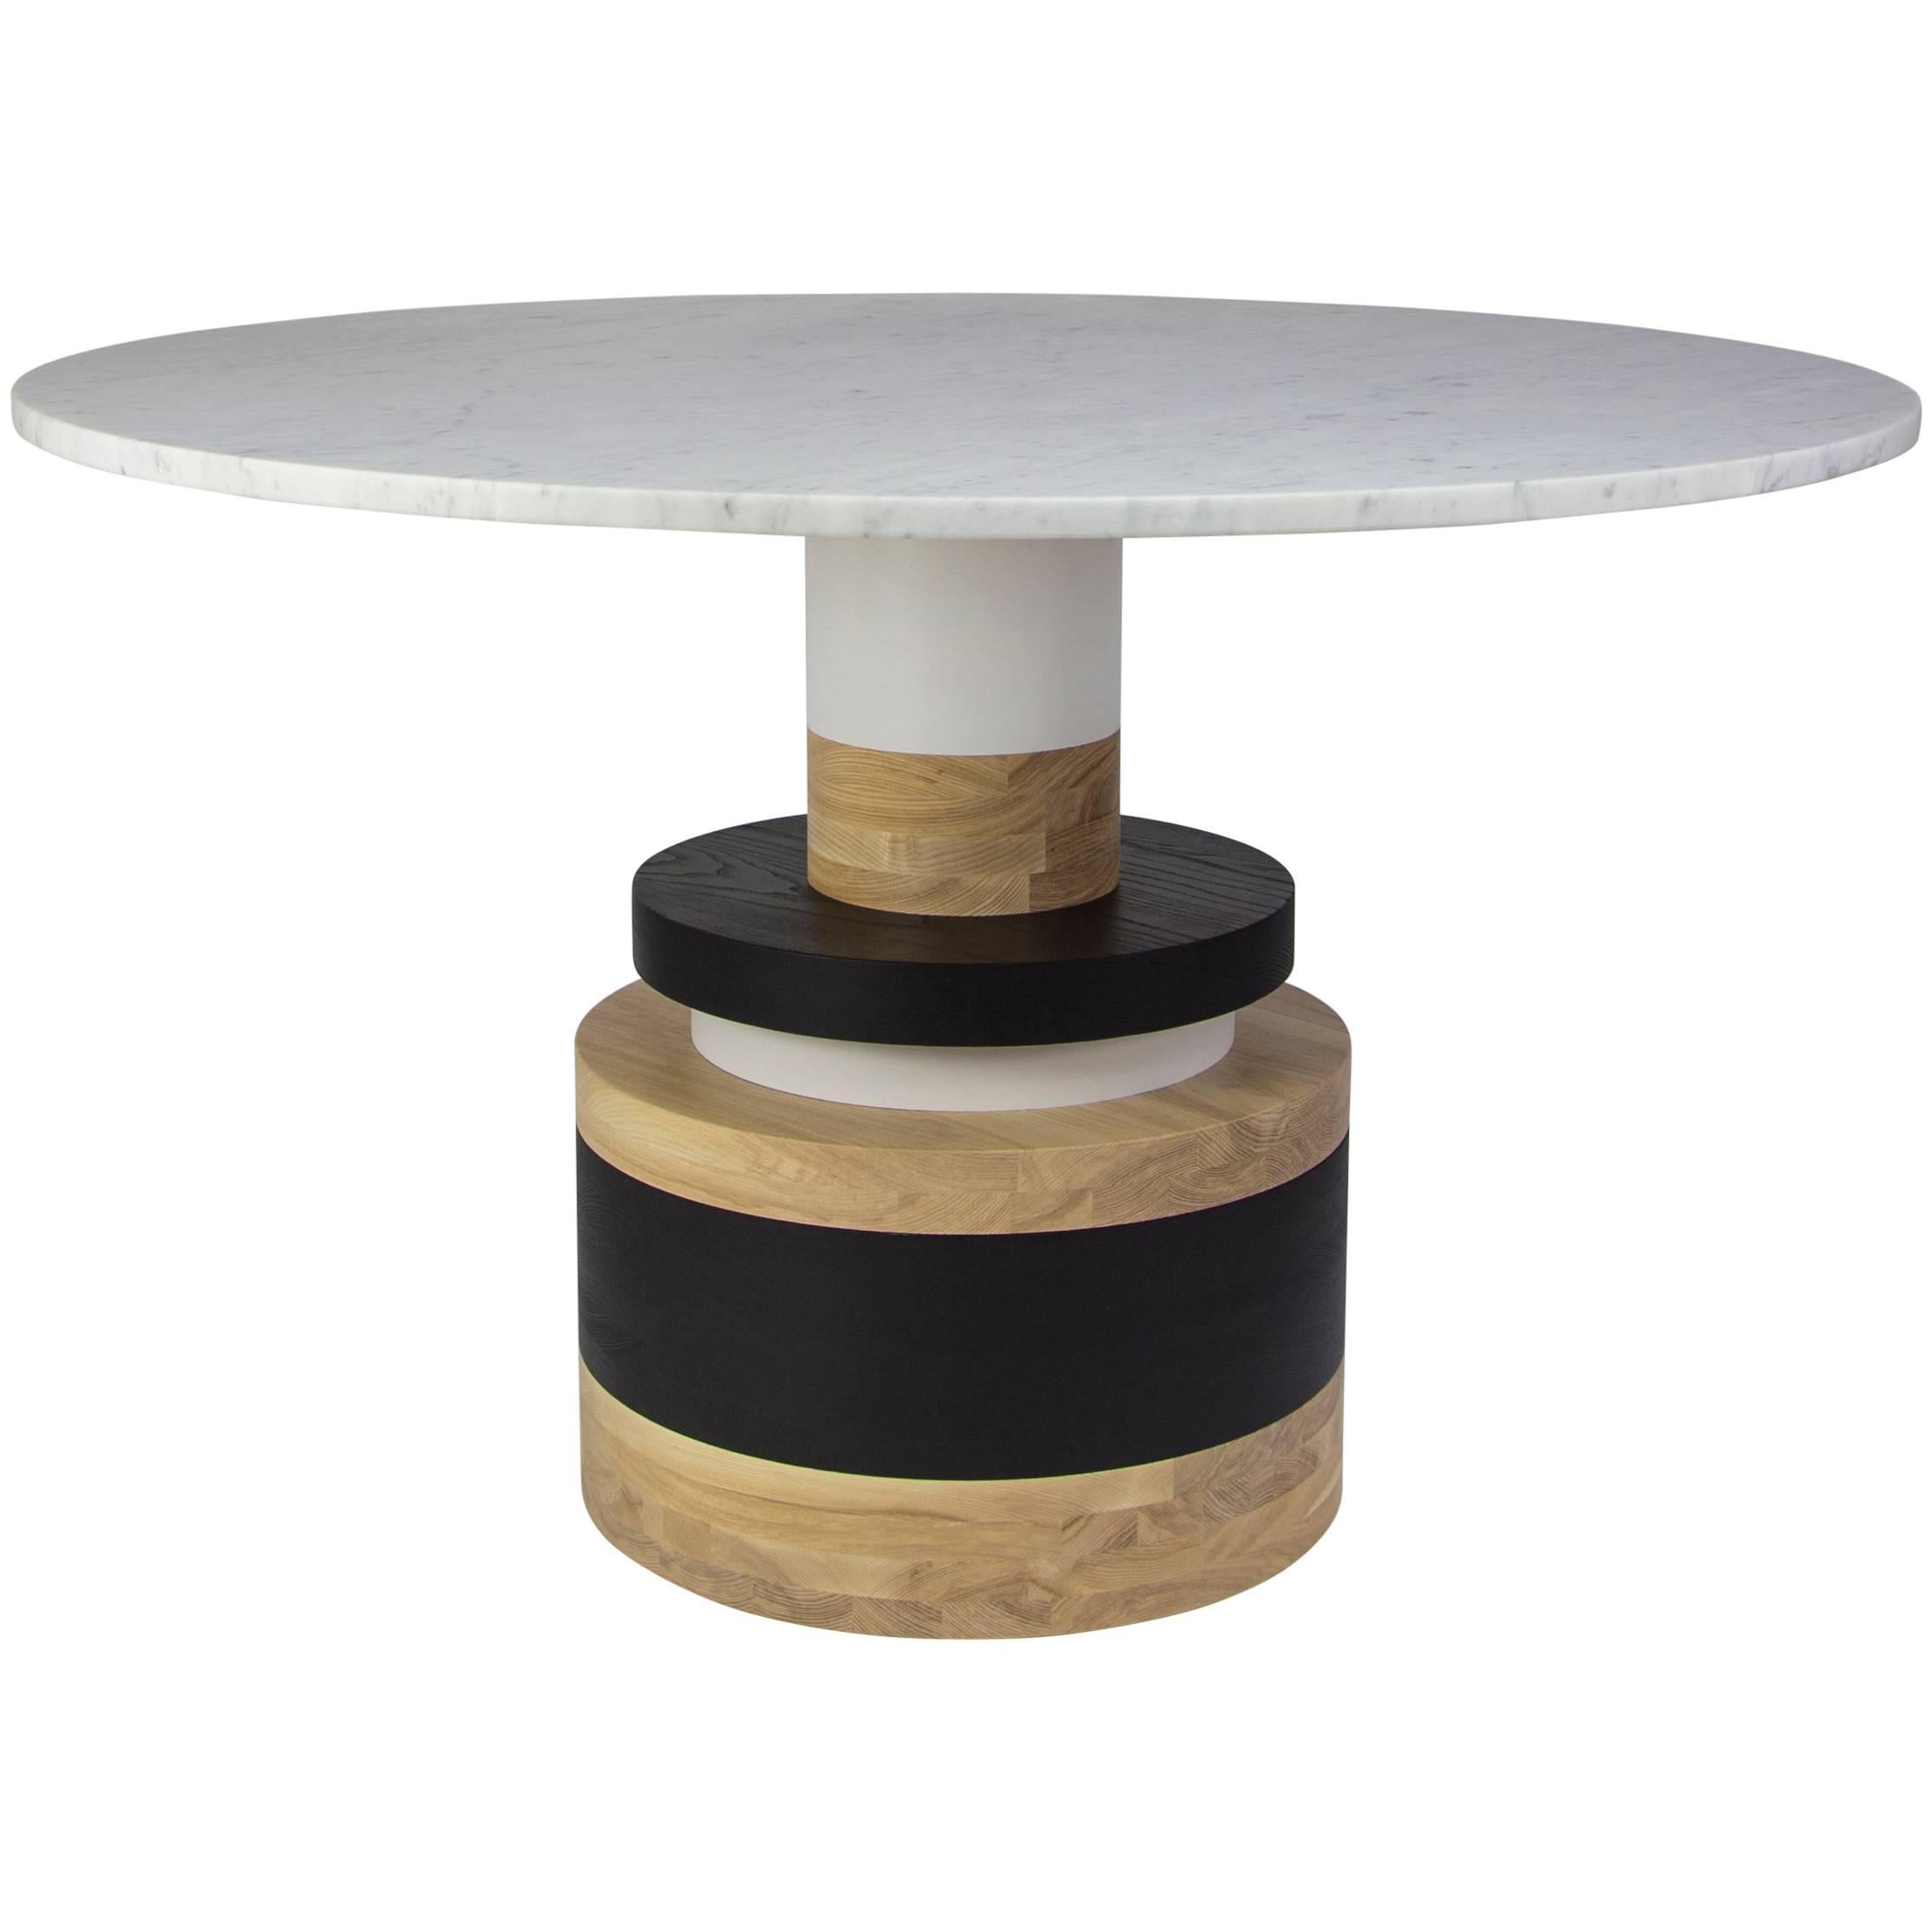 The Sottsass-inspired “Sass Dining Table” is a bold, graphic statement piece. A polished Nero Marquina marble top sits on an Amish-made base composed of painted and stacked wood circles. 

The version as shown is 42